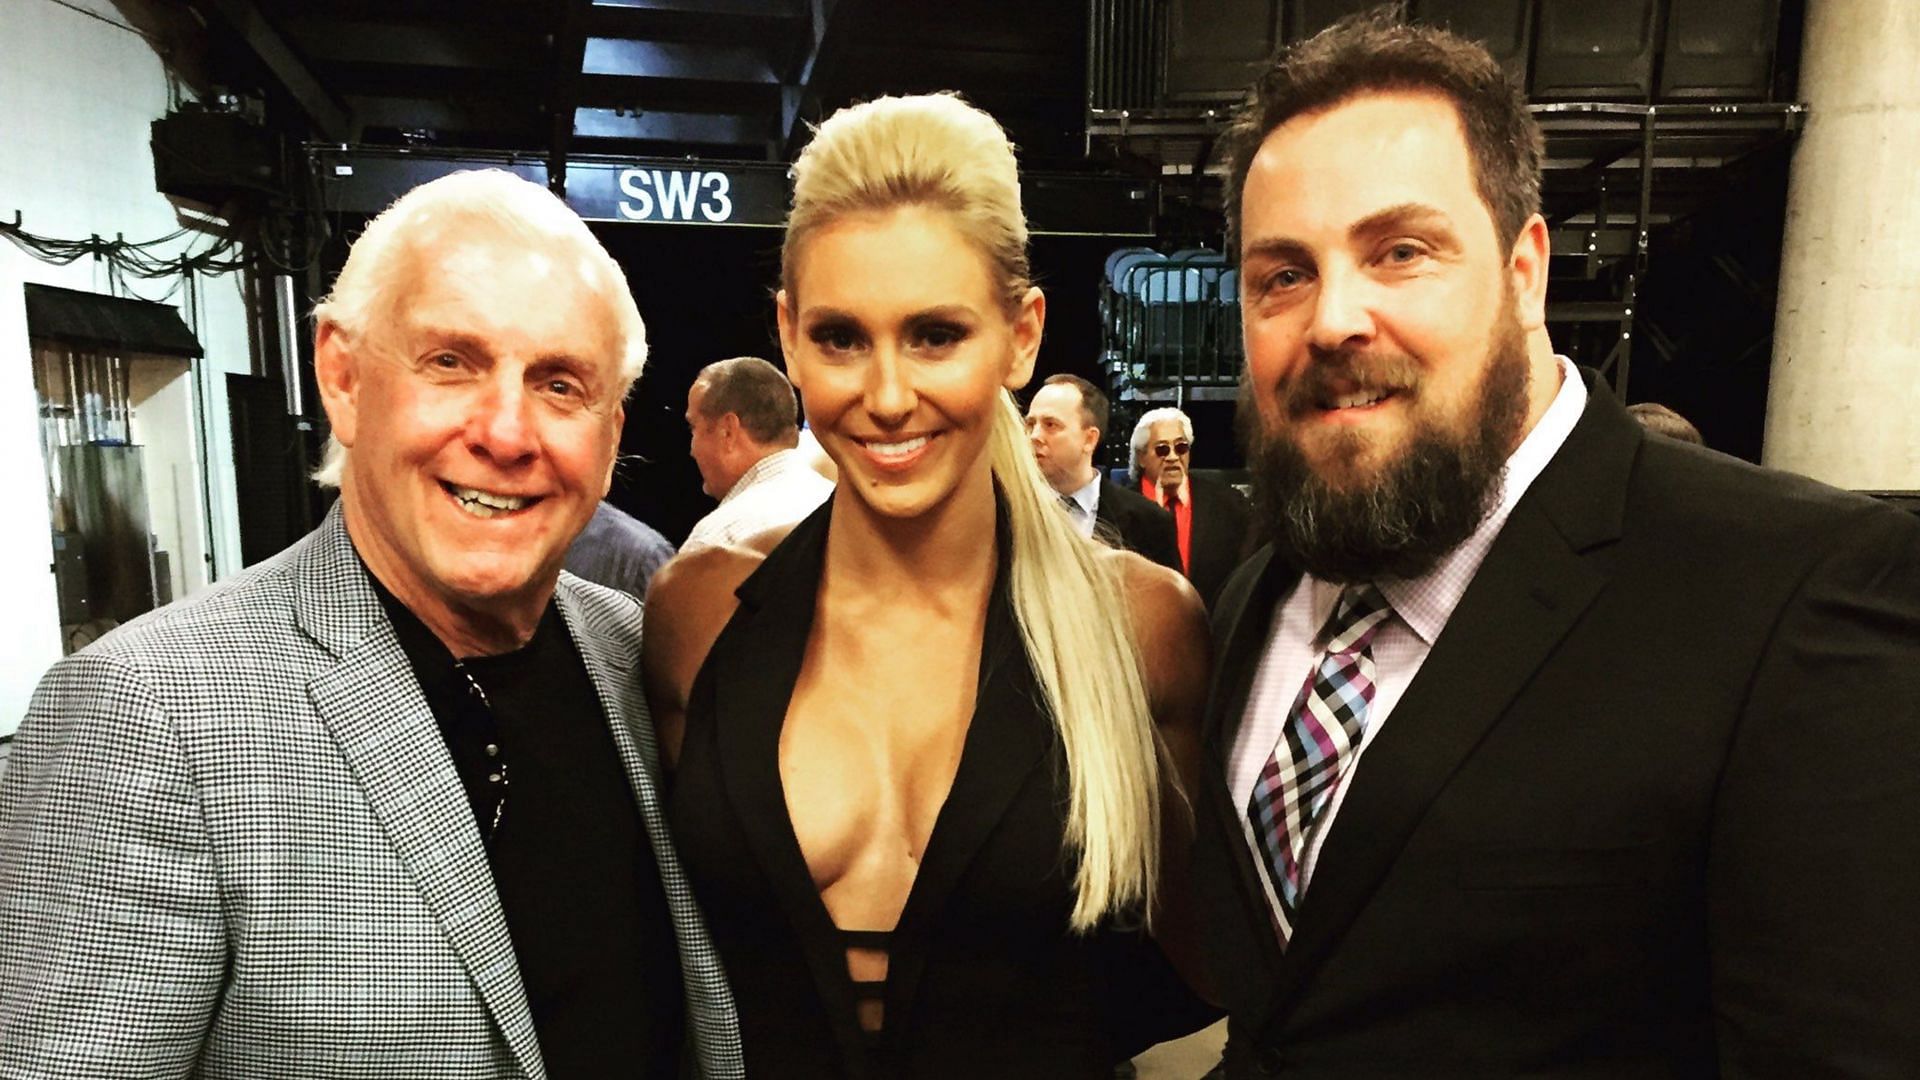 Charlotte and David Flair with their father Ric